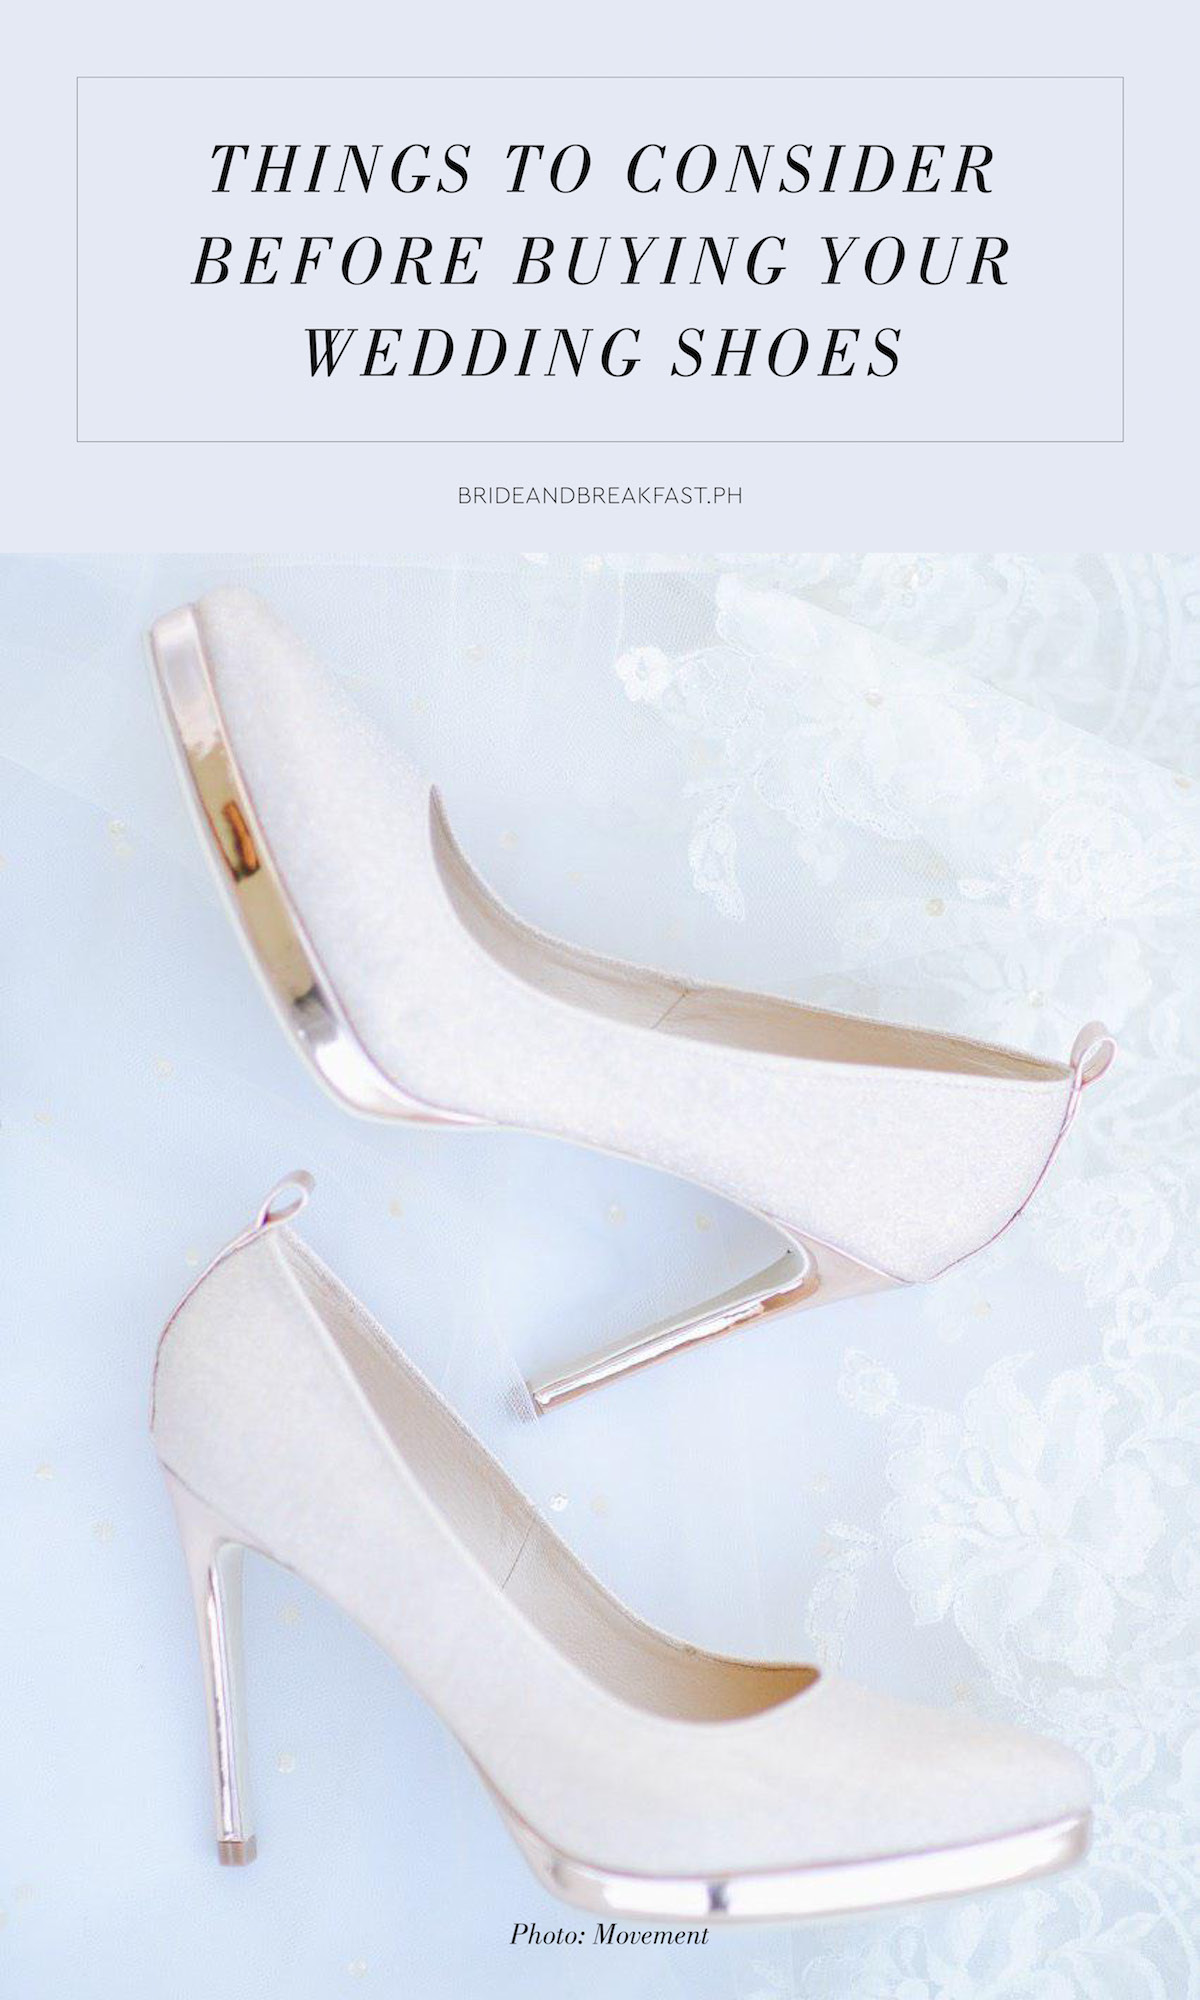 Things to Consider Before Buying Your Wedding Shoes Photo: Movement